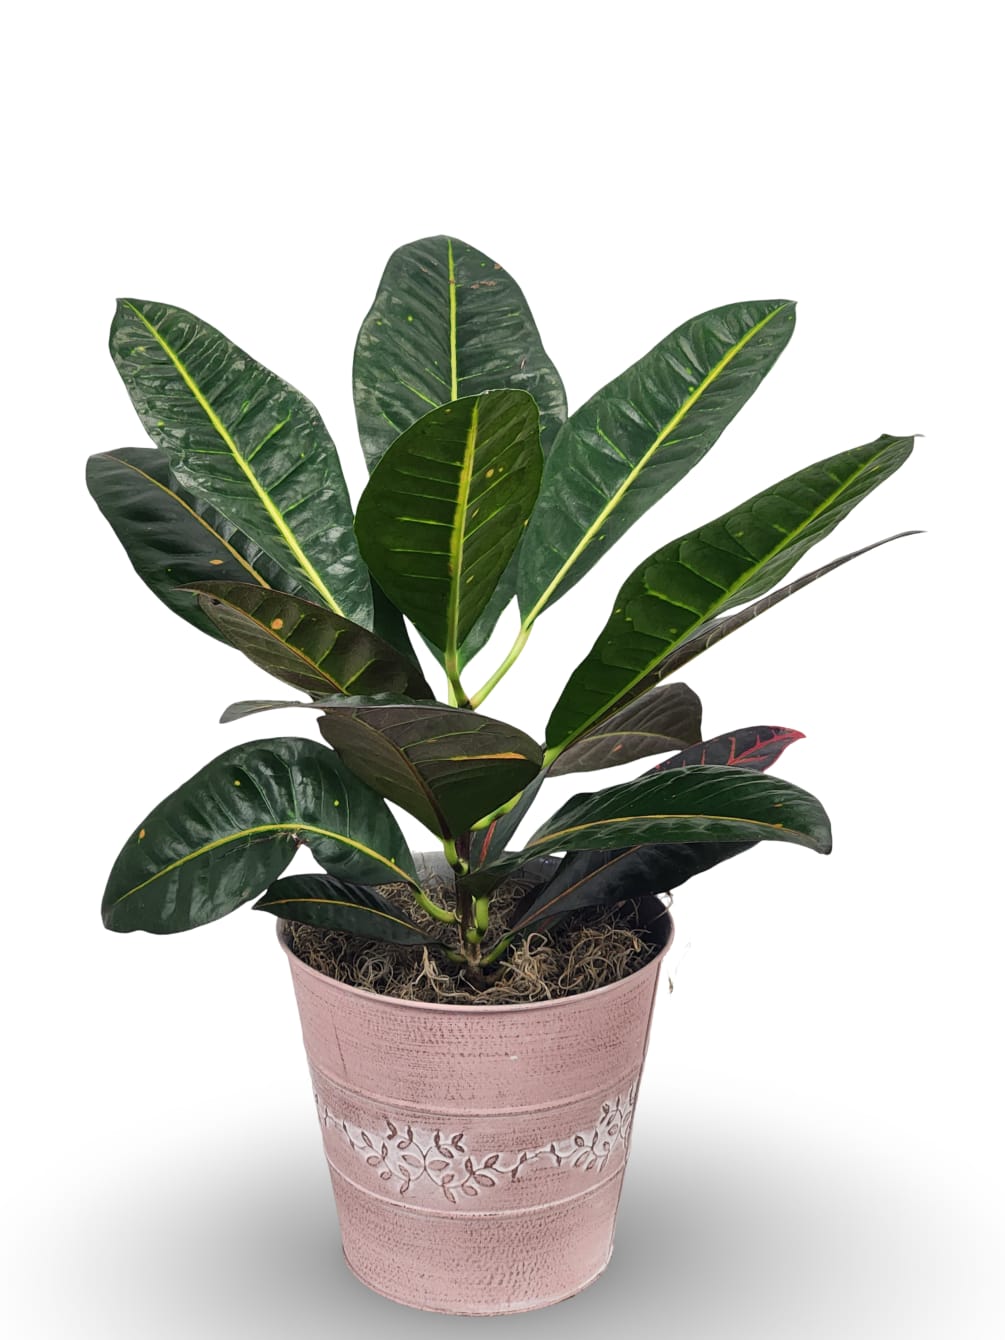 Select this unique plant, a Croton, that is perfect as a gift